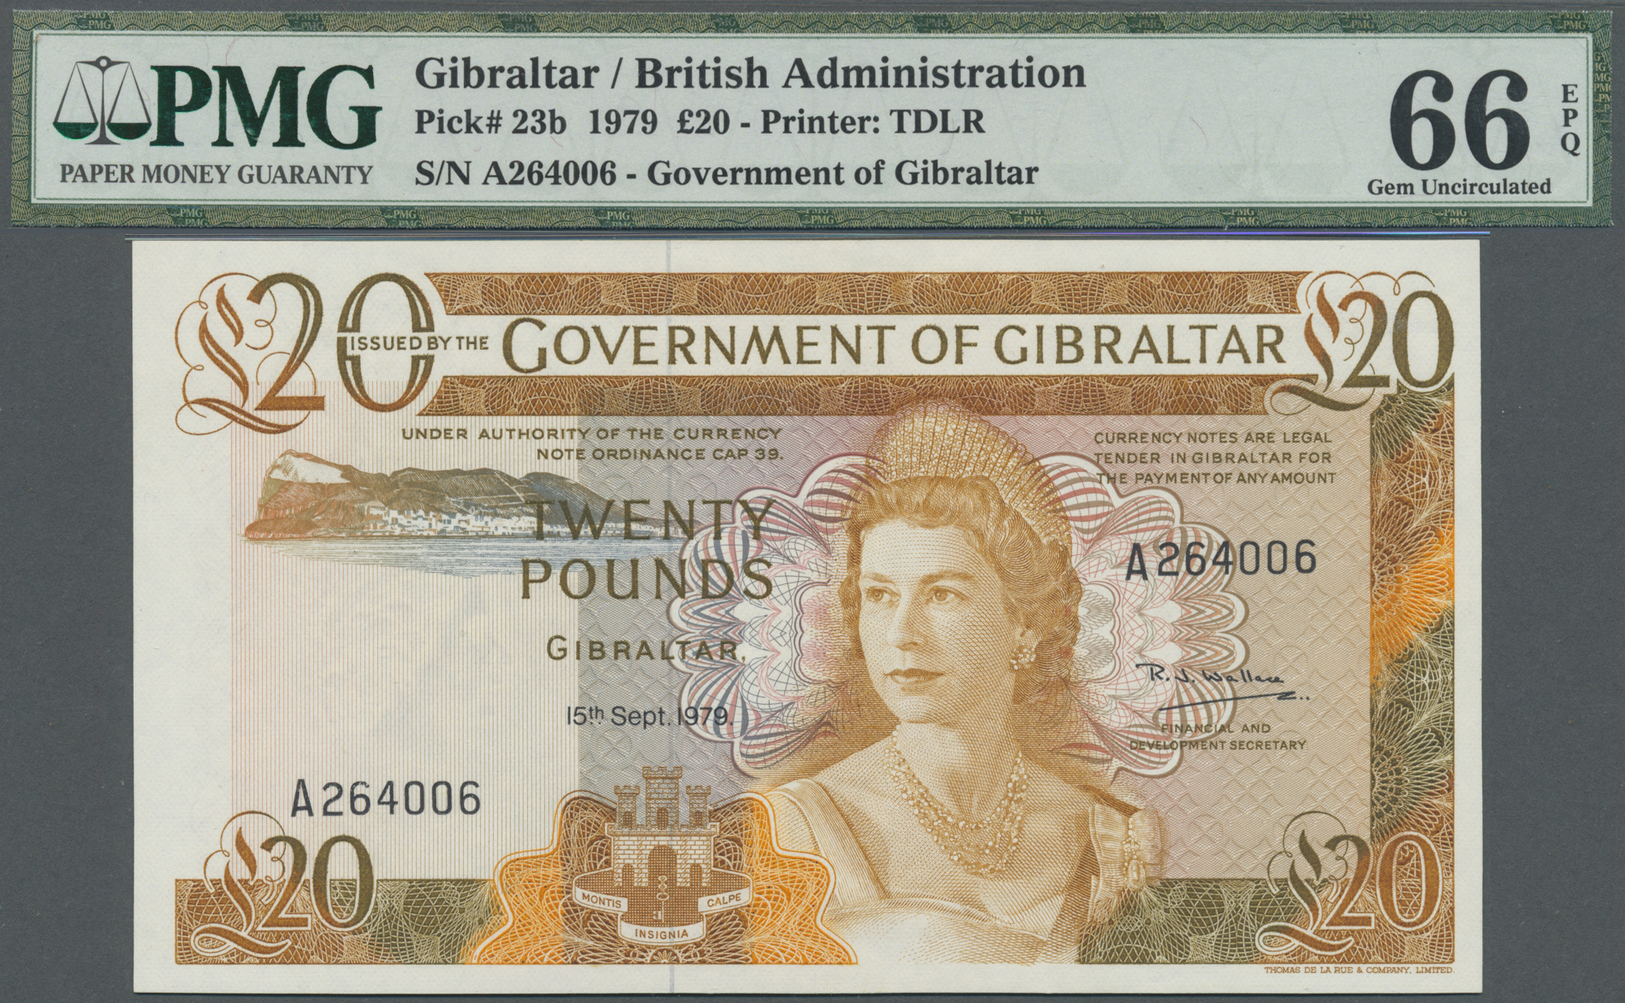 00898 Gibraltar: Government Of Gibraltar 20 Pounds September 15th 1979, P.23b In Perfect Uncirculated Condition, PMG Gra - Gibraltar